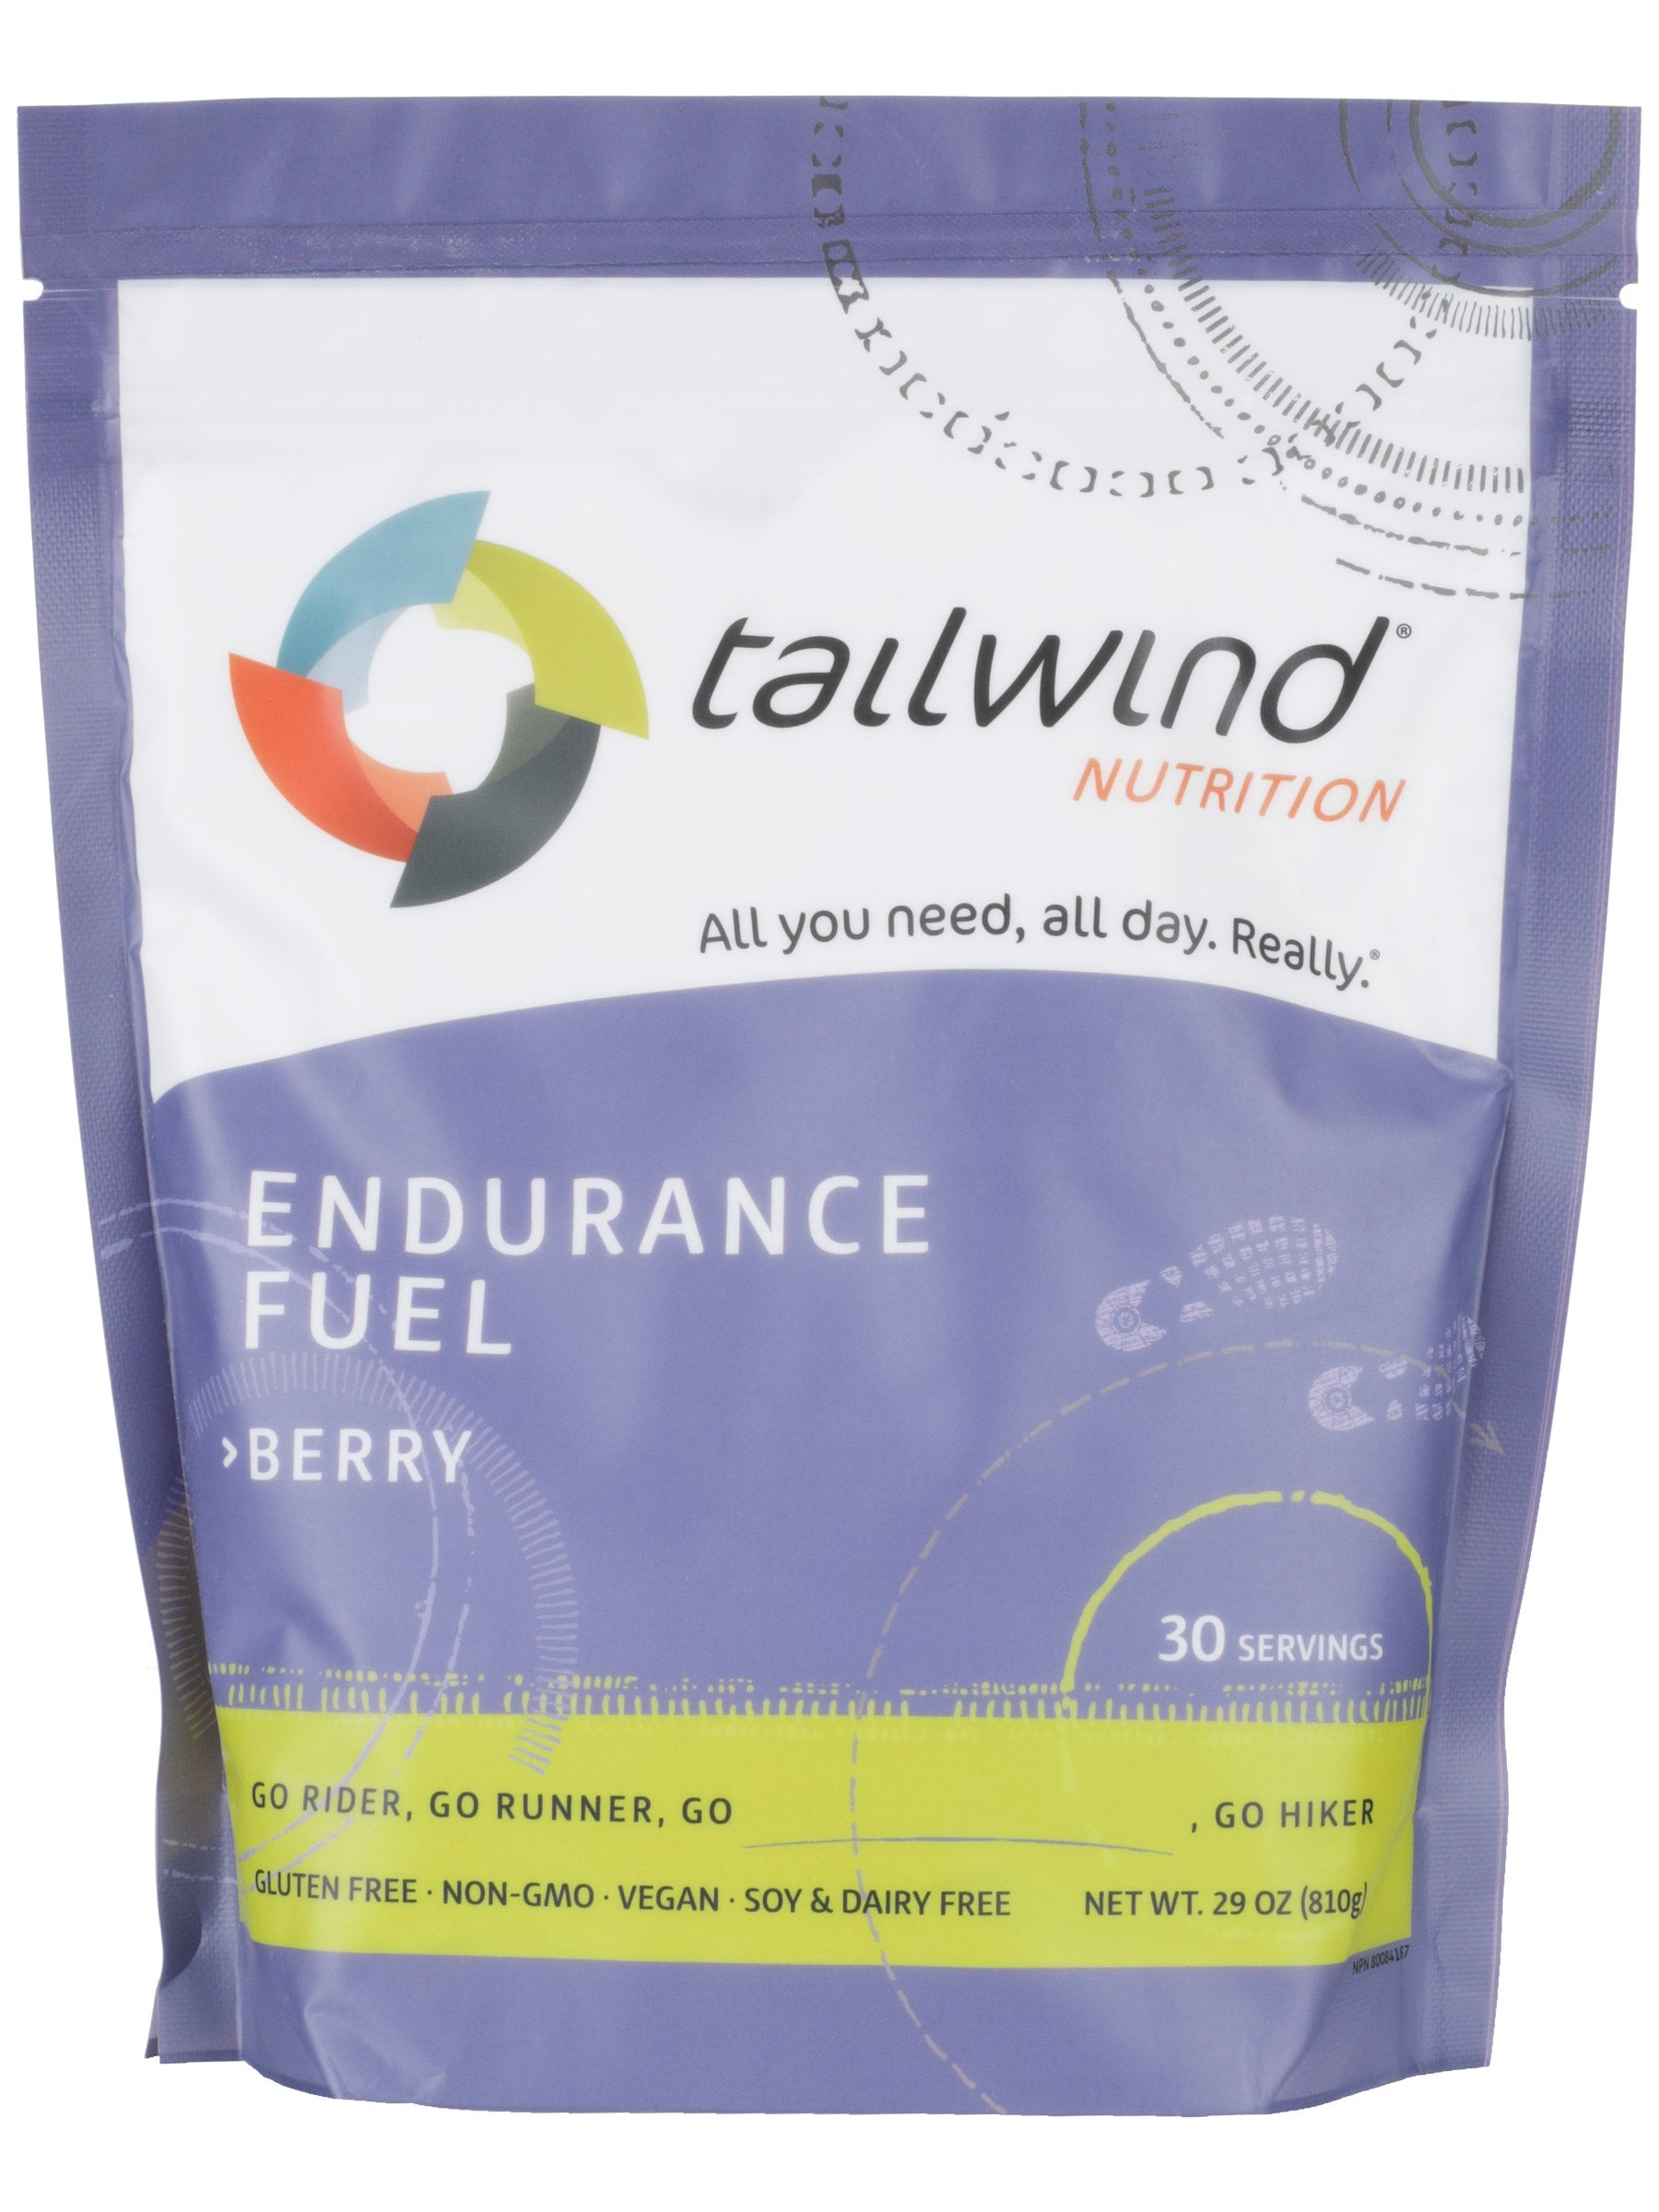 Front view of the packaging for Tailwind Nutrition Endurance Fuel (30 Servings) -flavor Berry